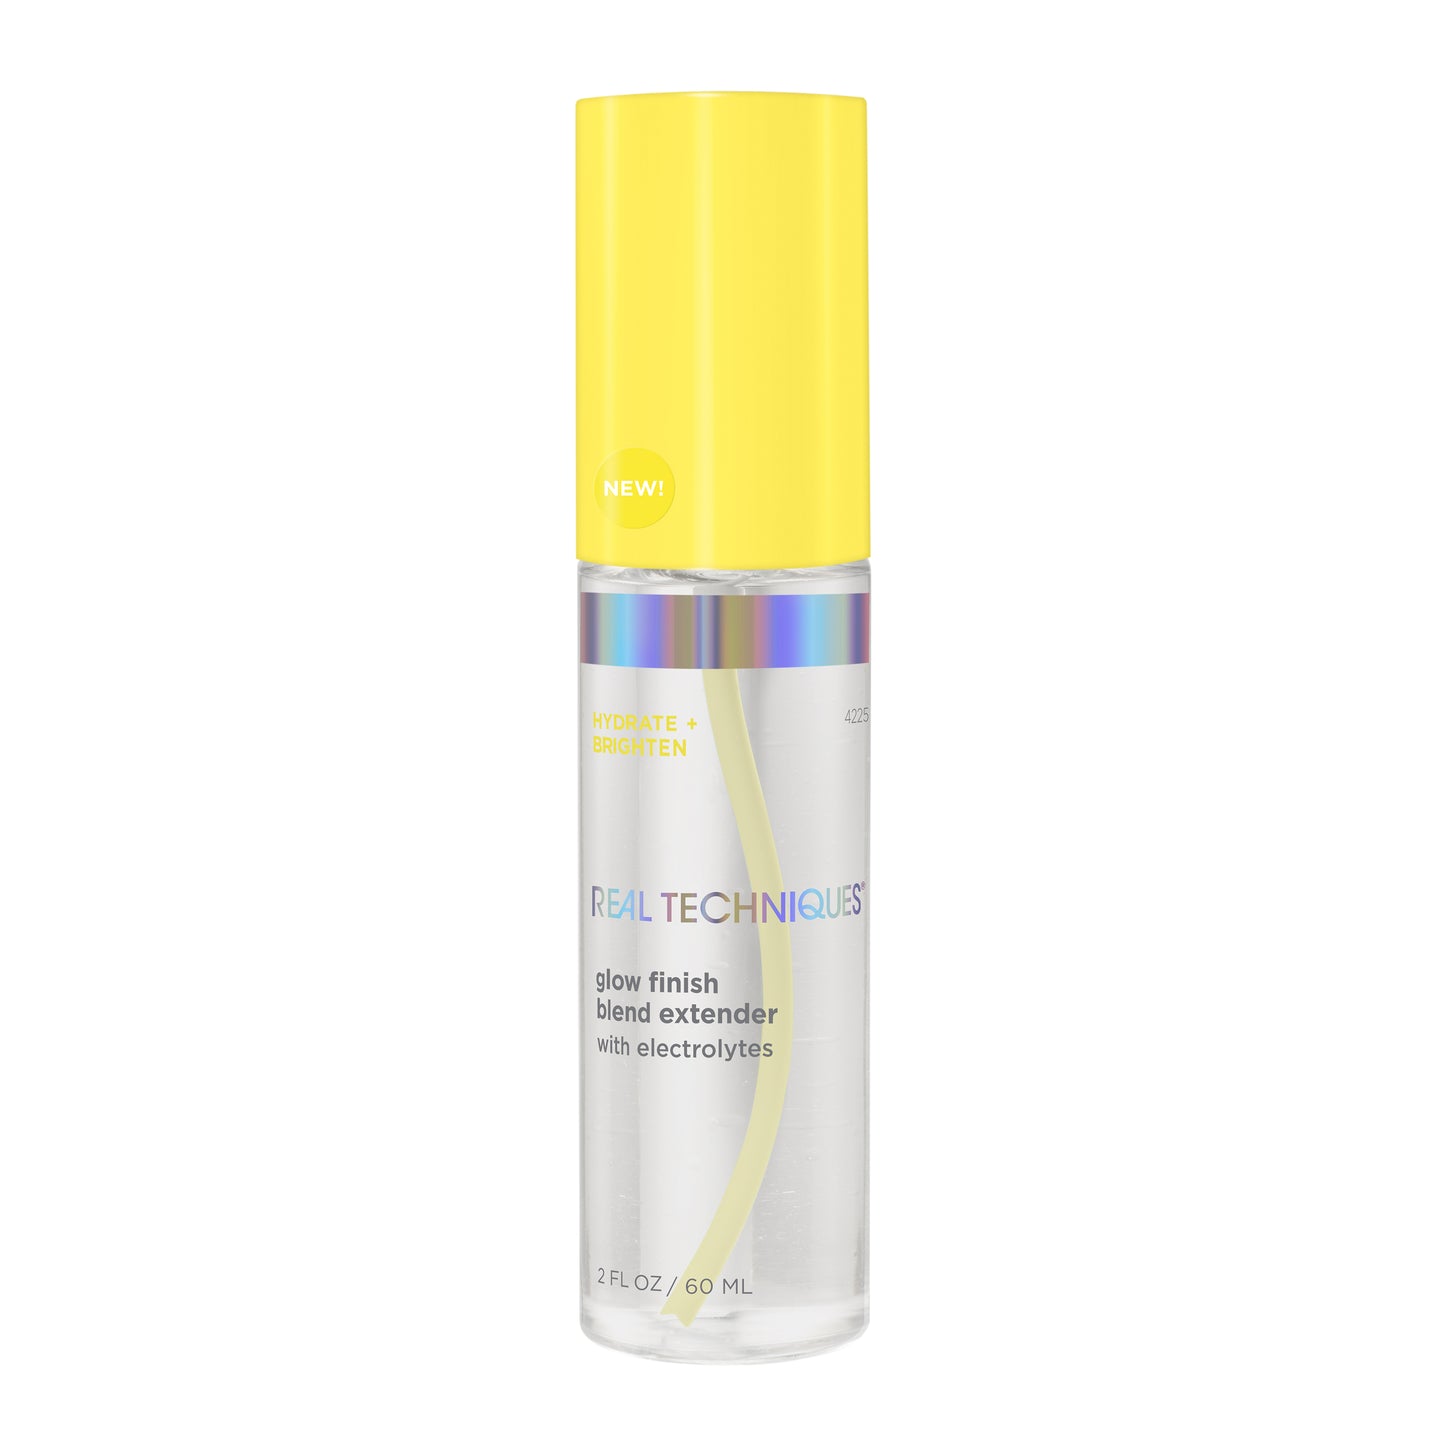 Real Techniques Sponge & make-up Setting Spray for Face, Hydrating with Vitamin C + Electrolytes